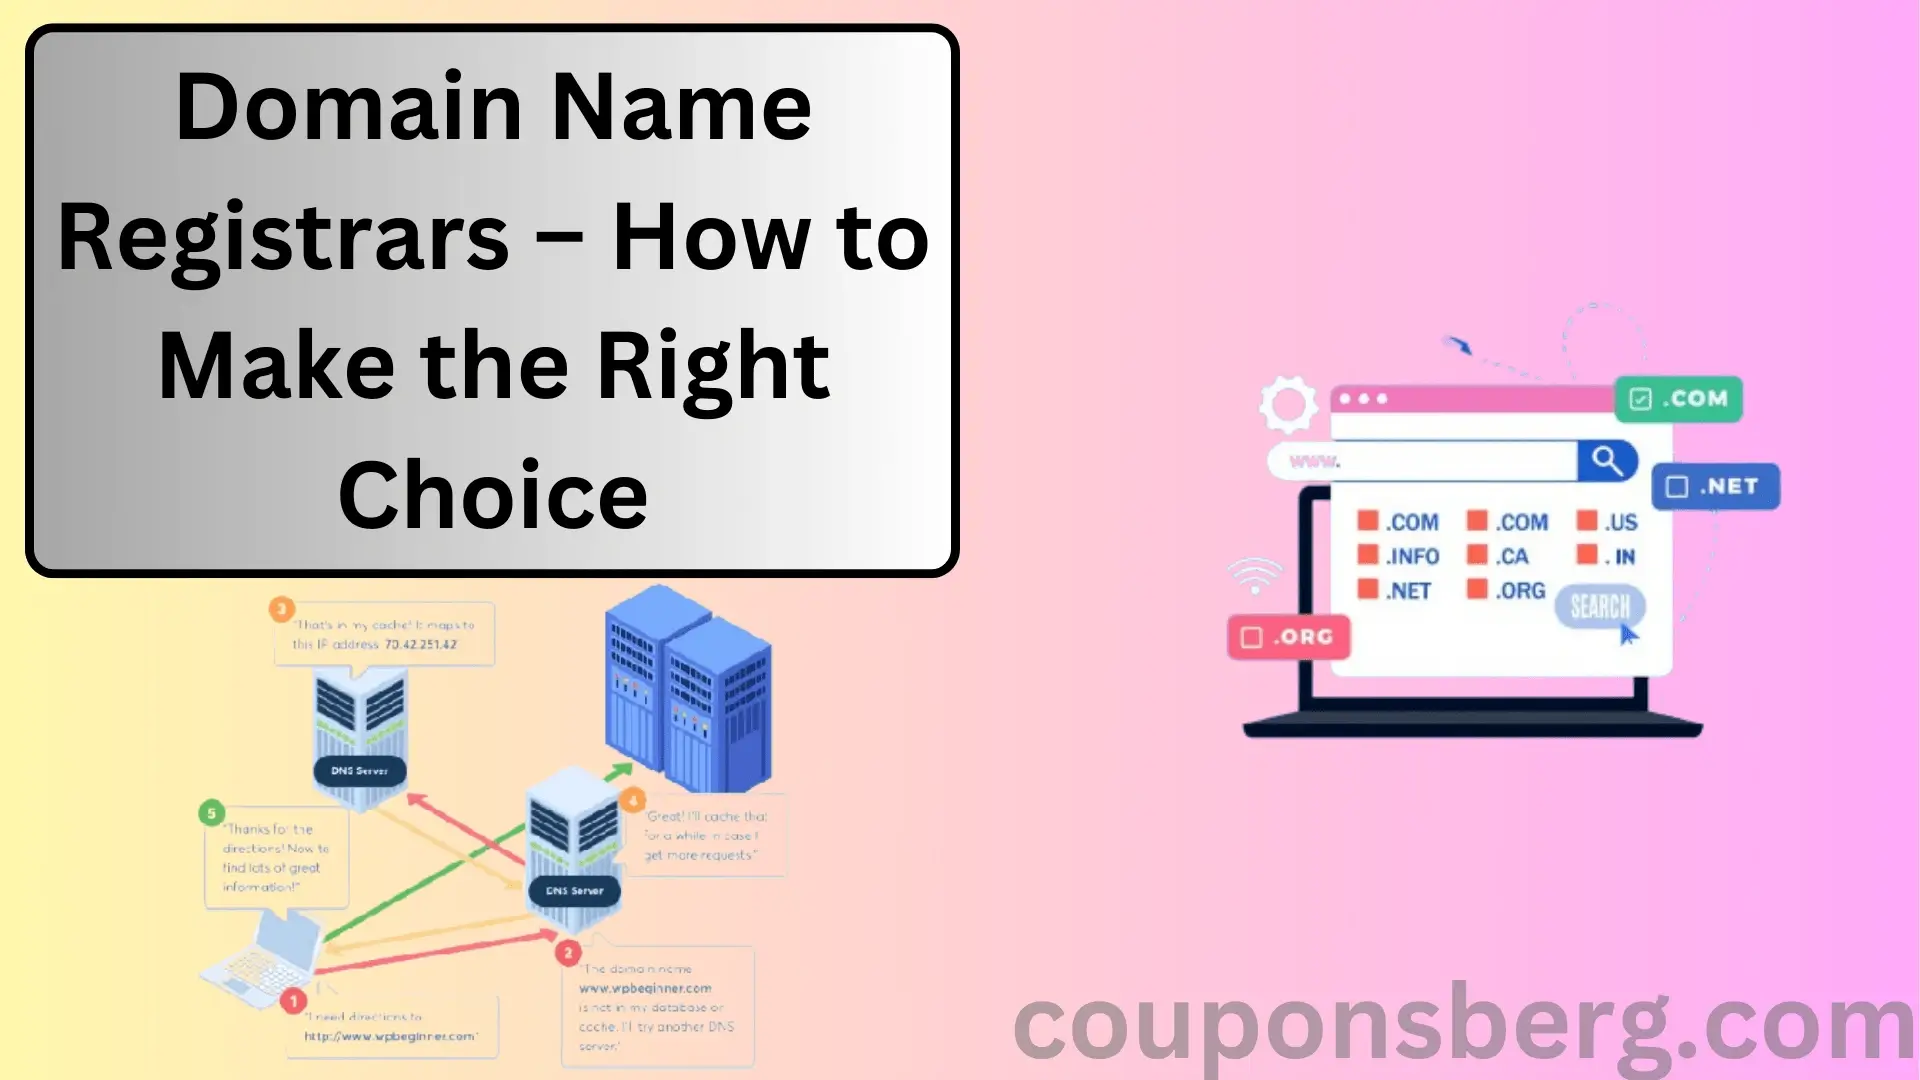 Domain Name Registrars – How to Make the Right Choice